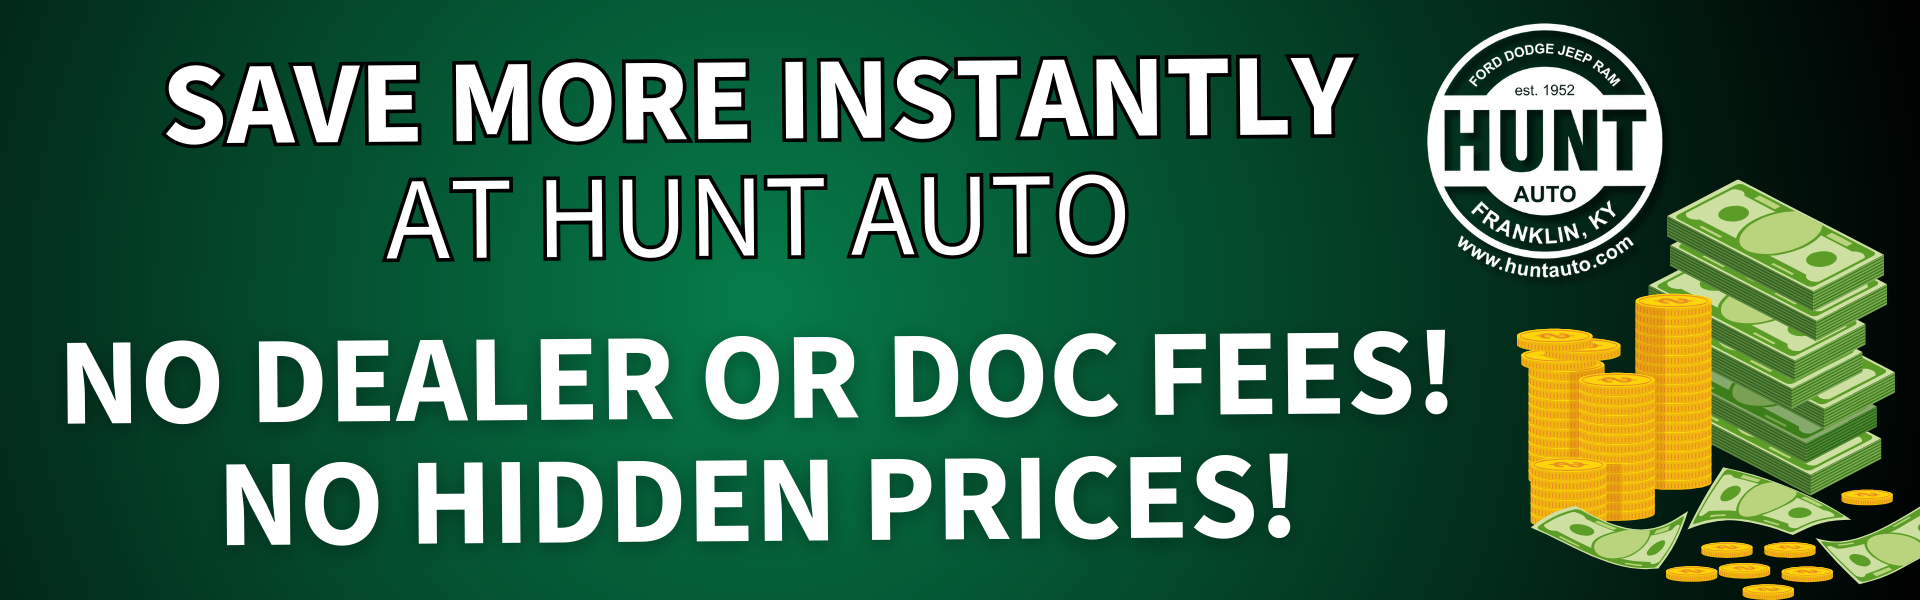 Save more with no dealer or doc fees